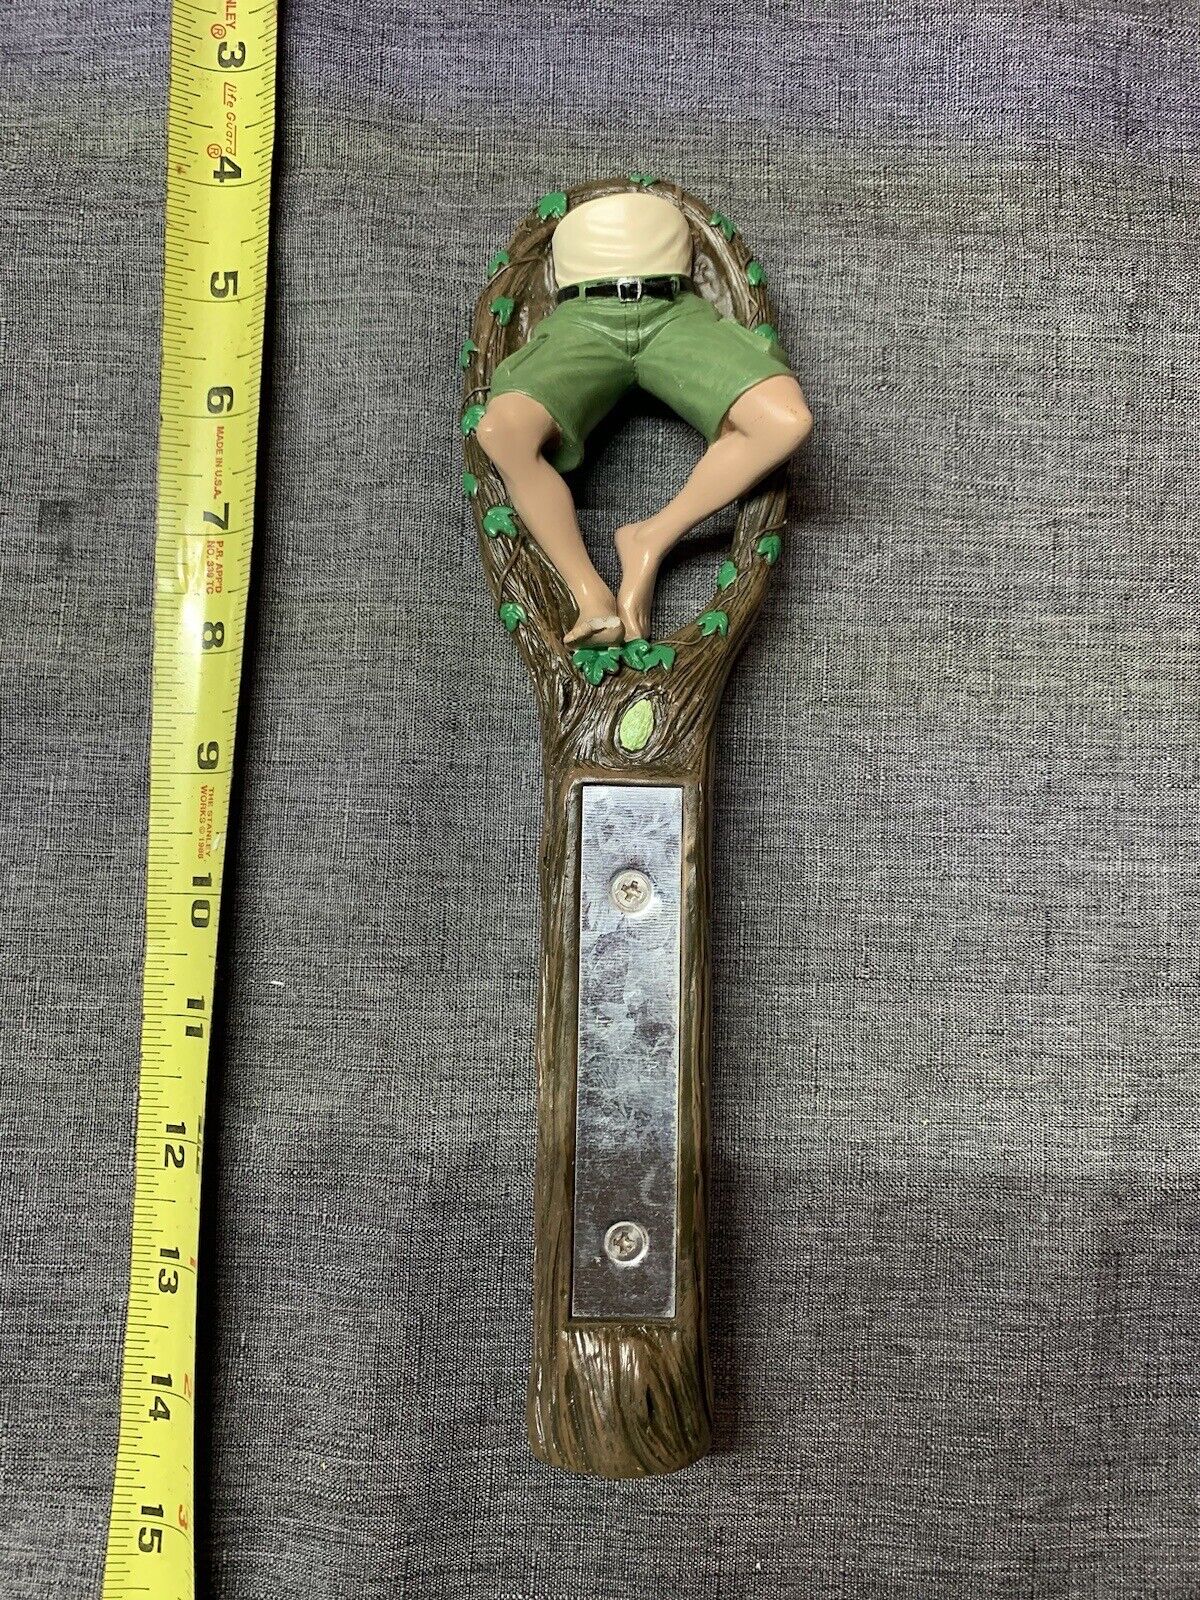 Shorts Brewing Company Figural Beer Tap Handle